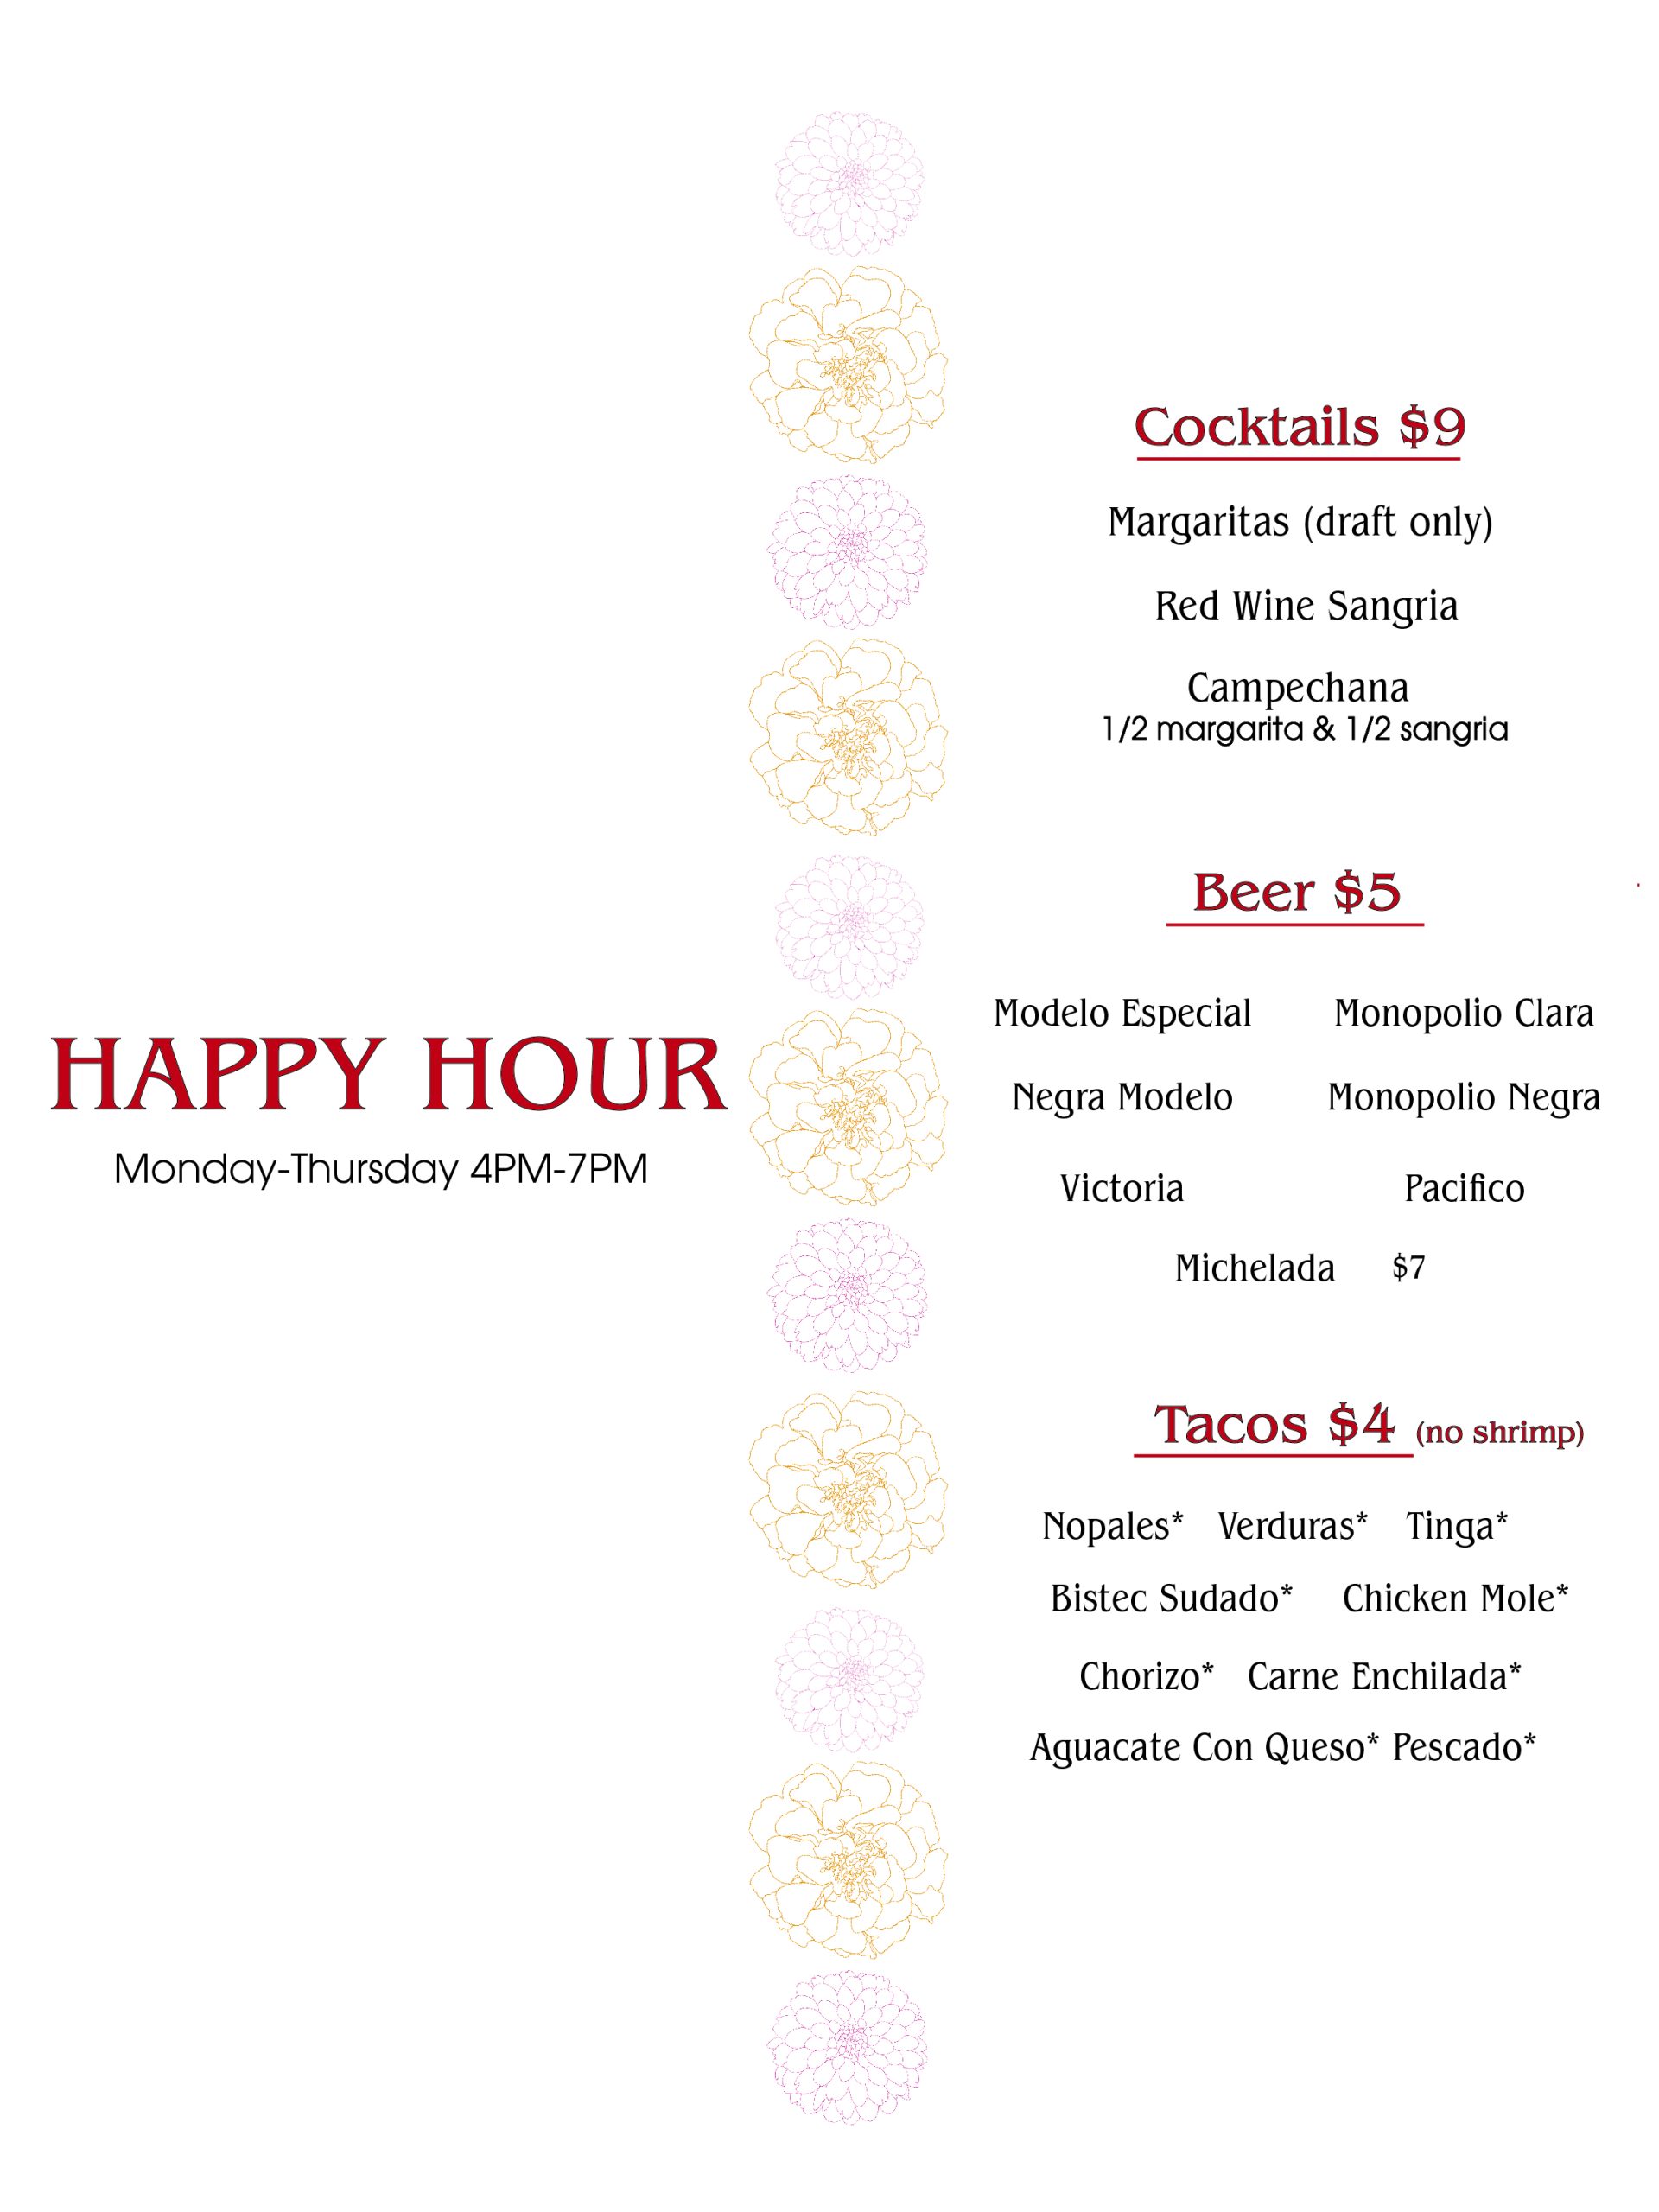 Chavela’s Happy Hour menu available Monday through Thursday from 4pm to 7pm featuring $9 draft cocktails, $5 beers, and $4 tacos